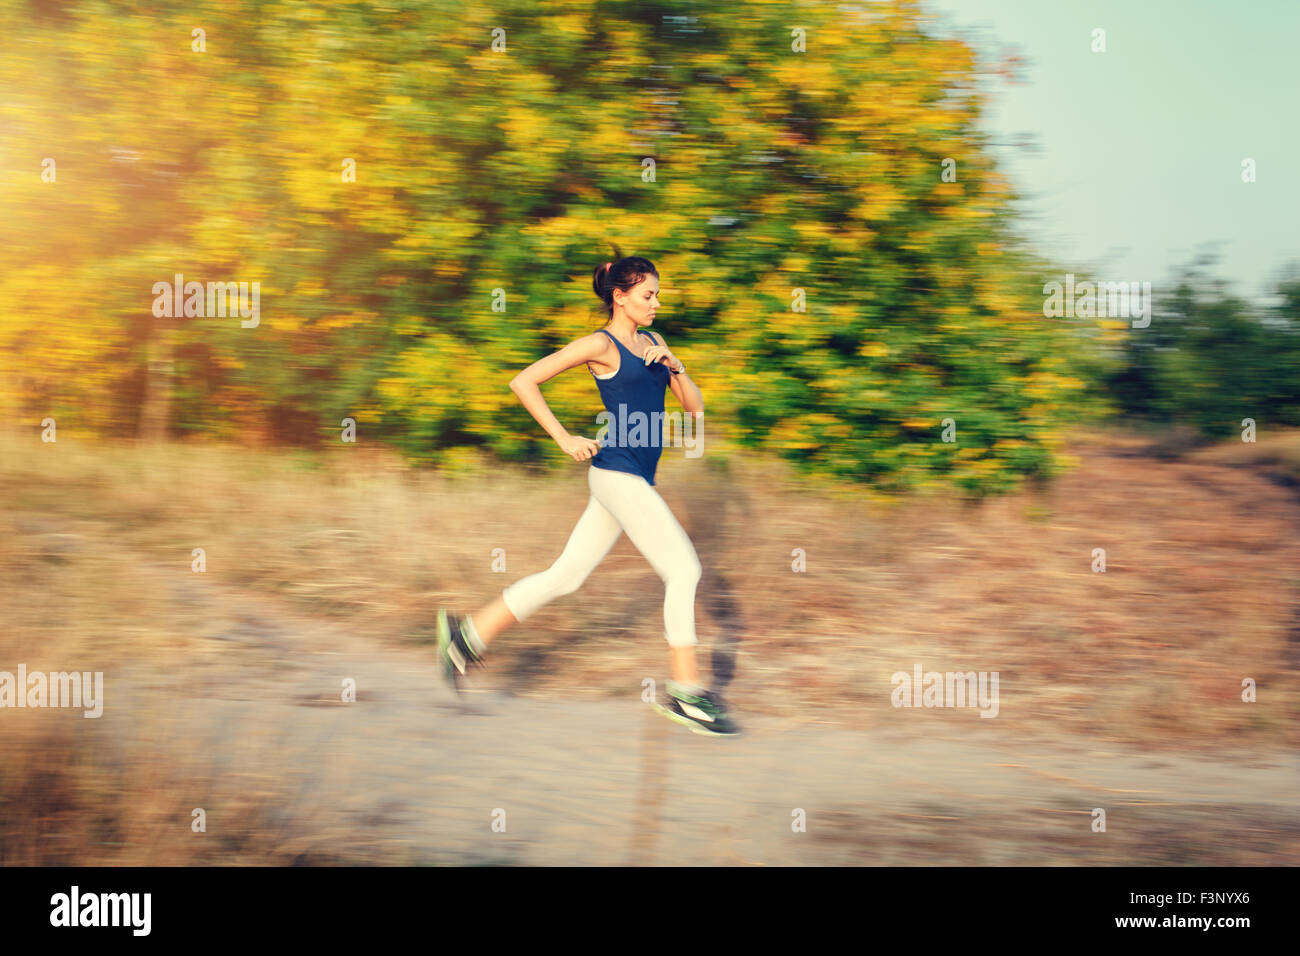 Young woman running on a rural road at sunset in autumn forest. Lifestyle sports background Stock Photo